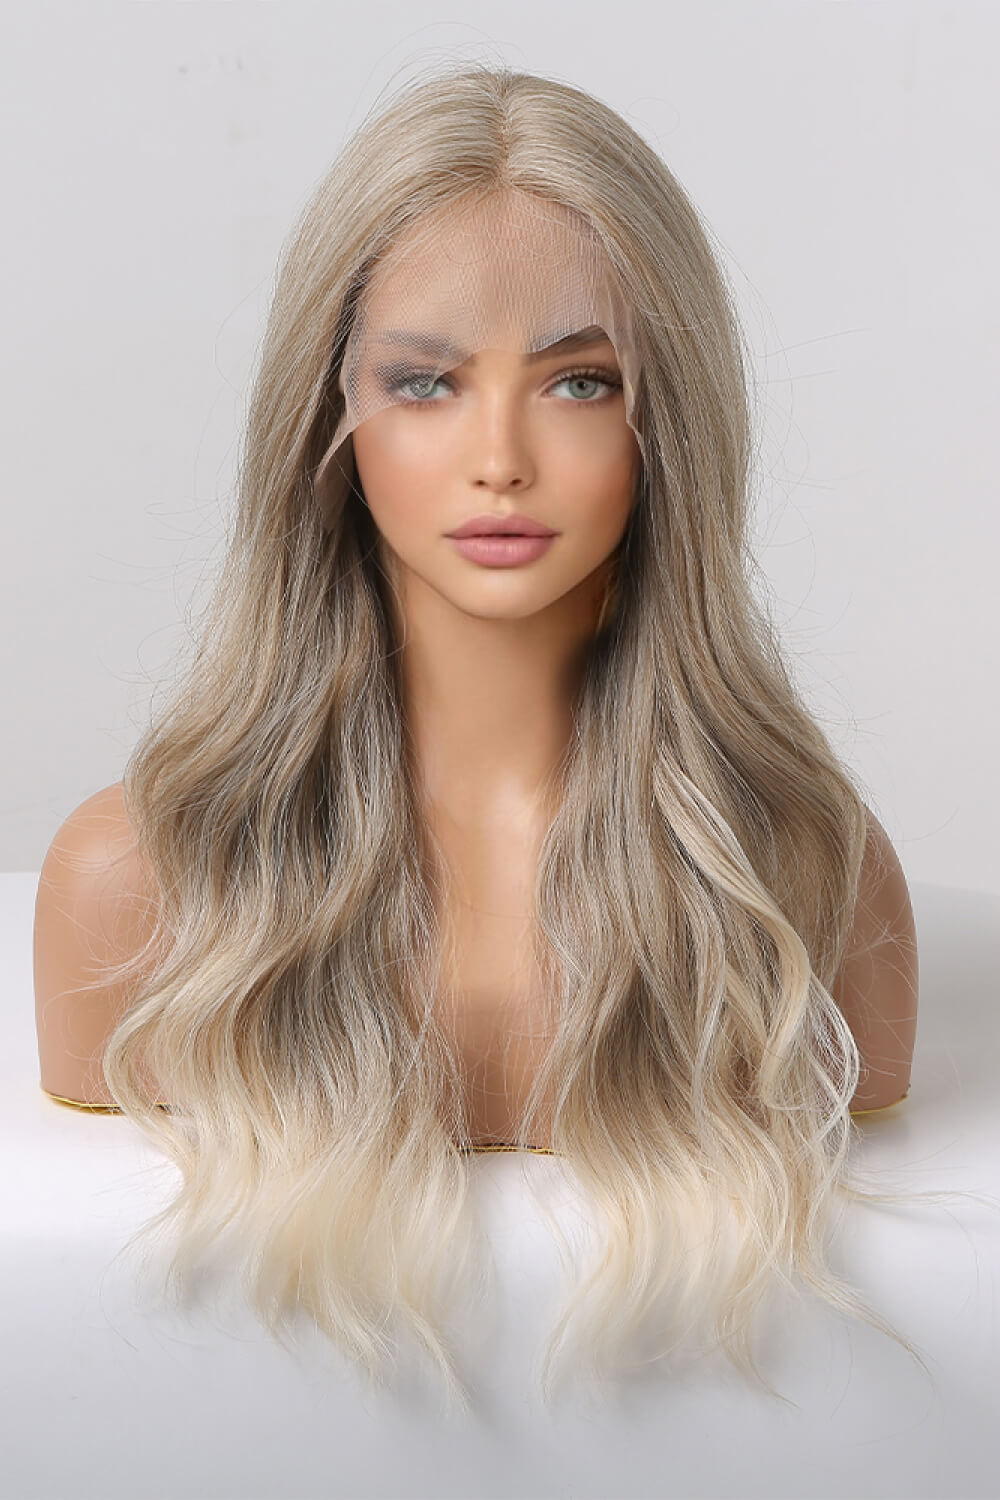 13-2-lace-front-wigs-synthetic-long-wave-24-150-density-in-medium-blonde-highlights